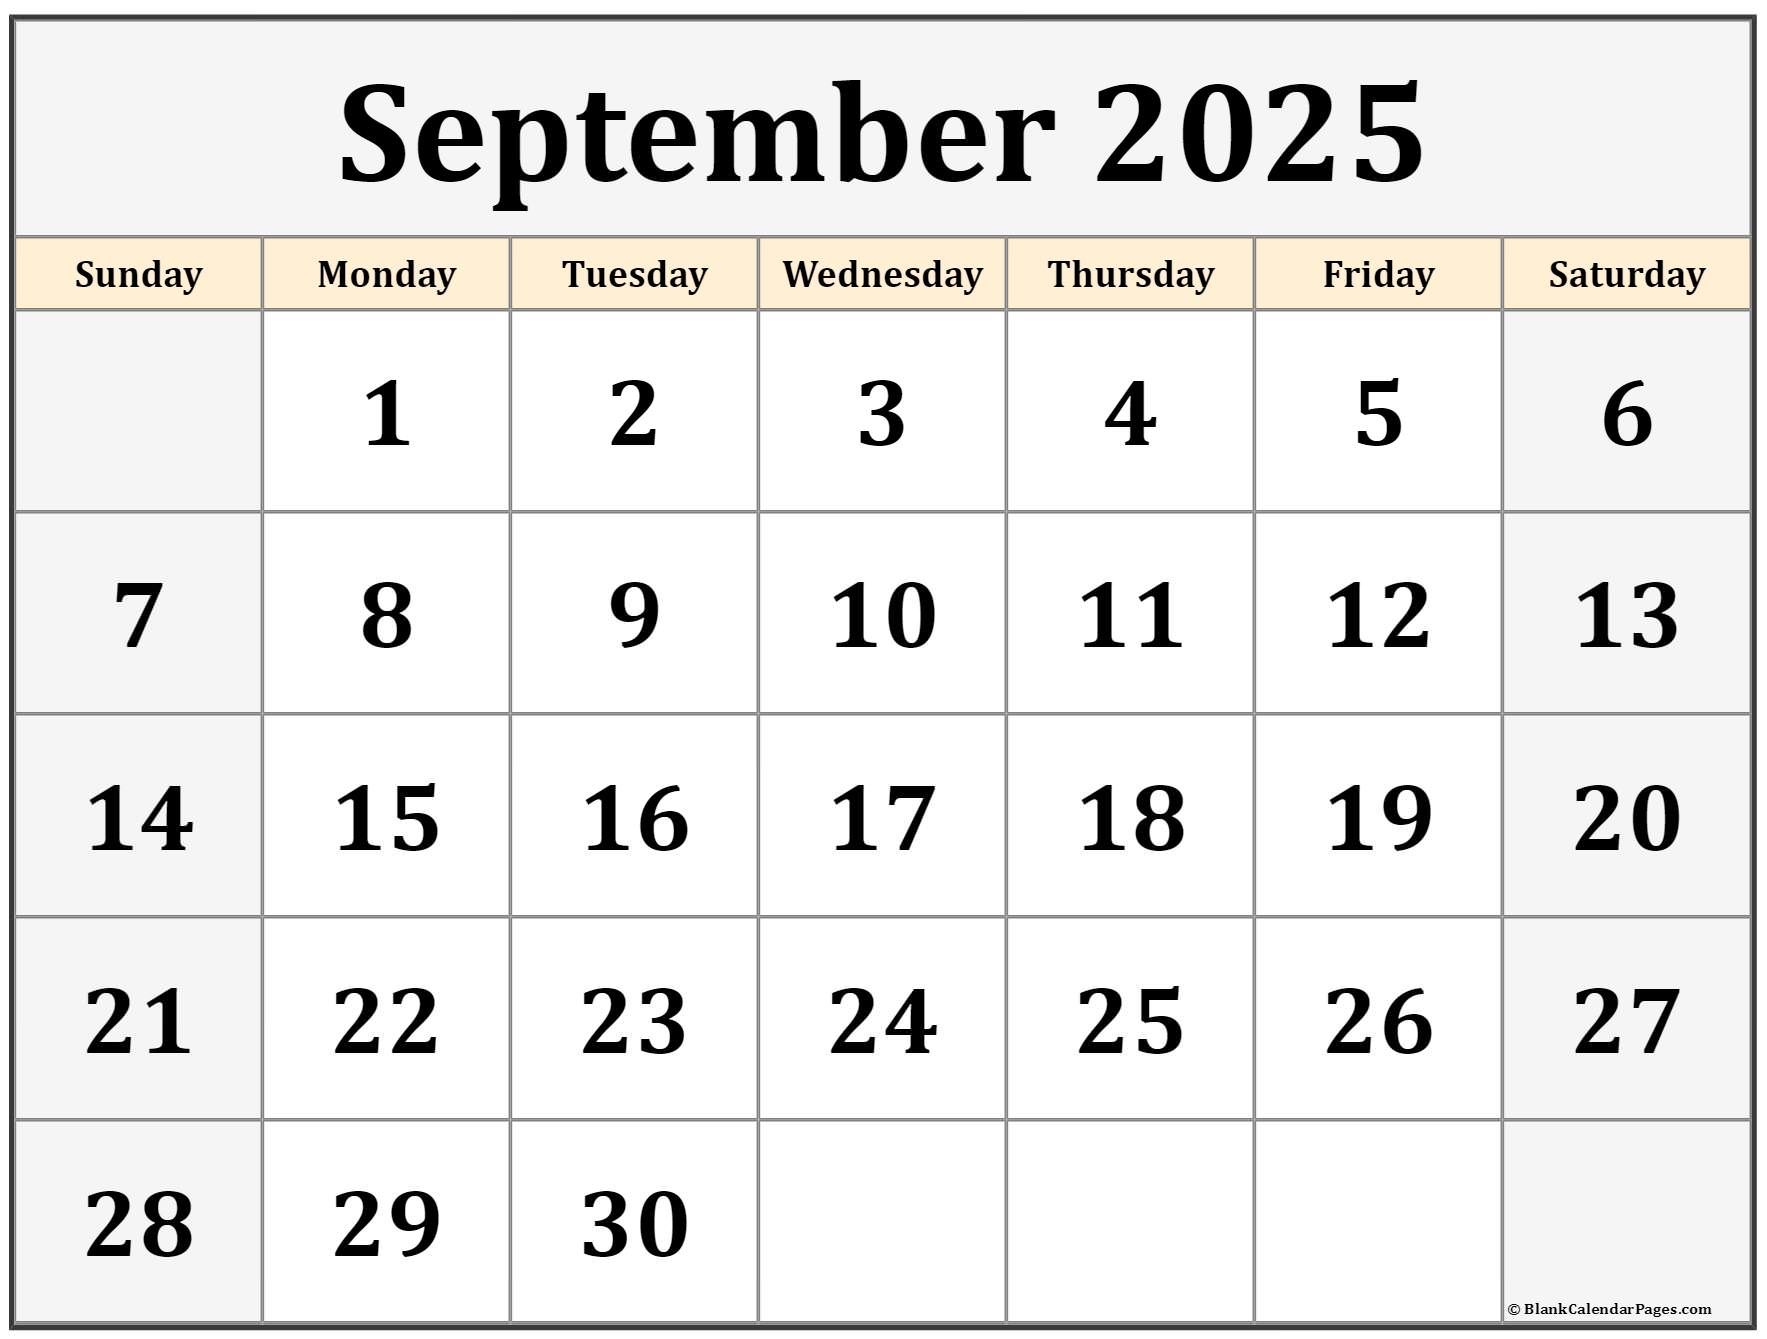 september-2025-calendar-templates-for-word-excel-and-pdf